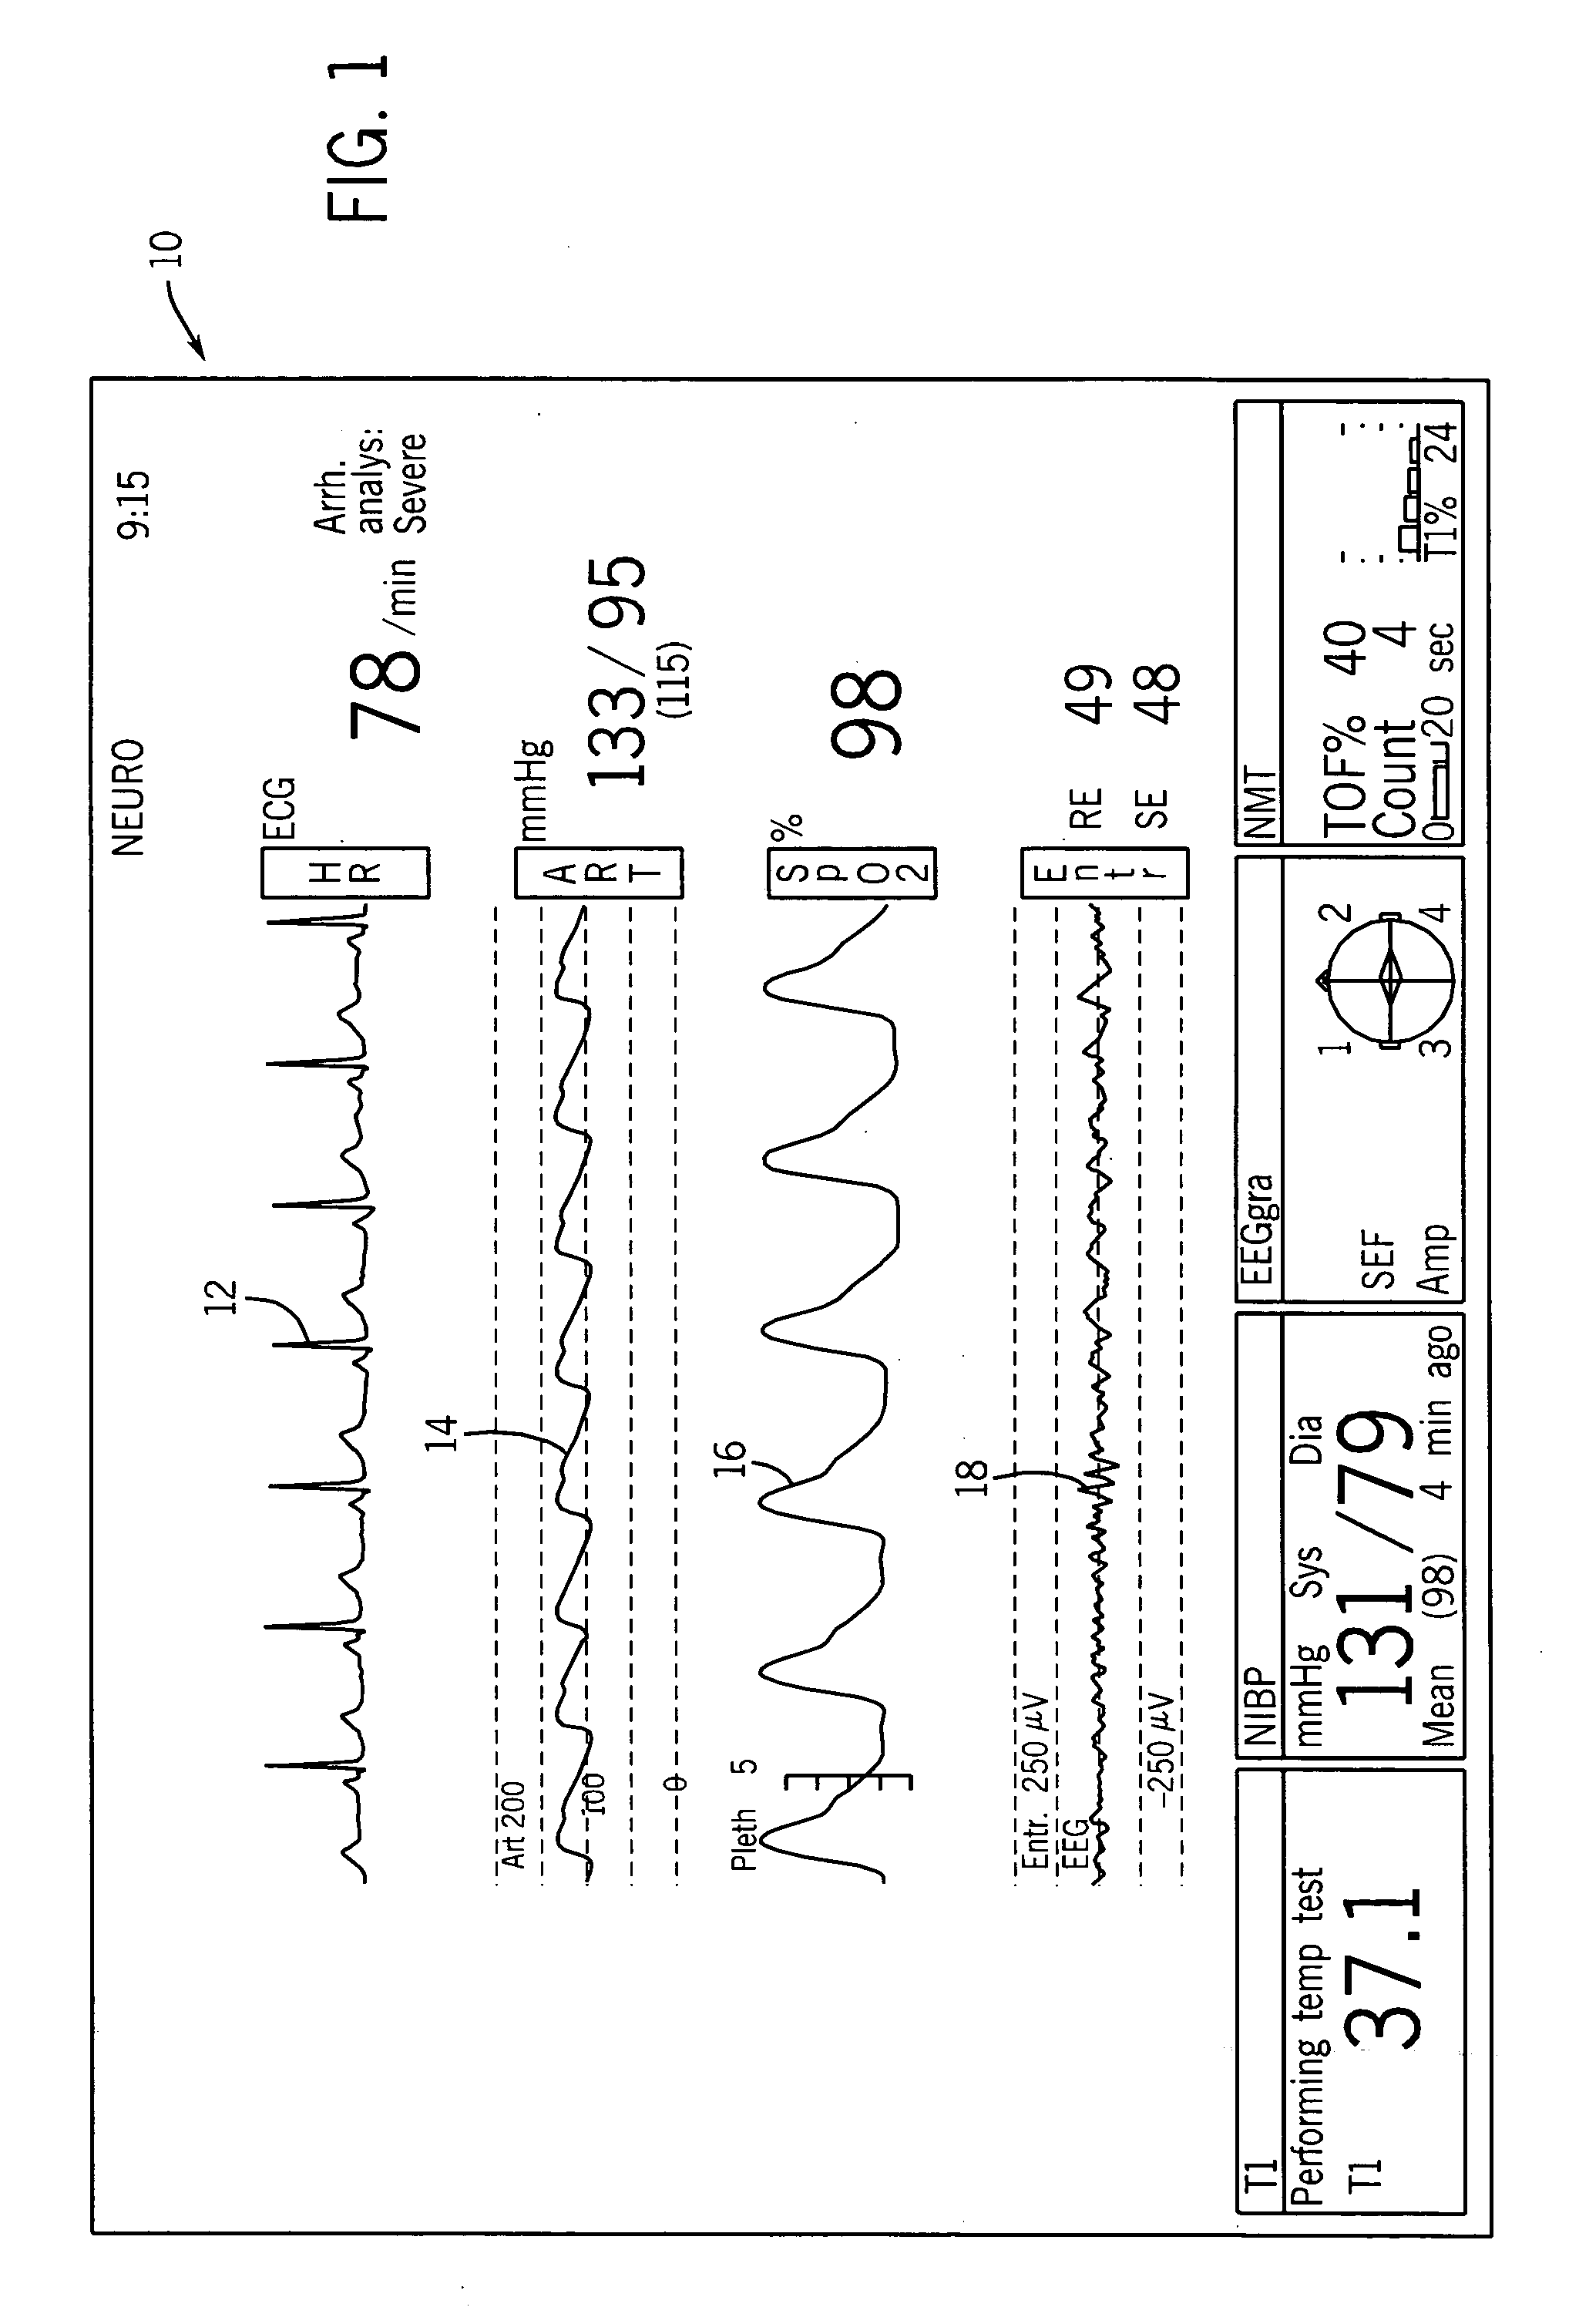 Integrated anesthesia monitoring and ultrasound display